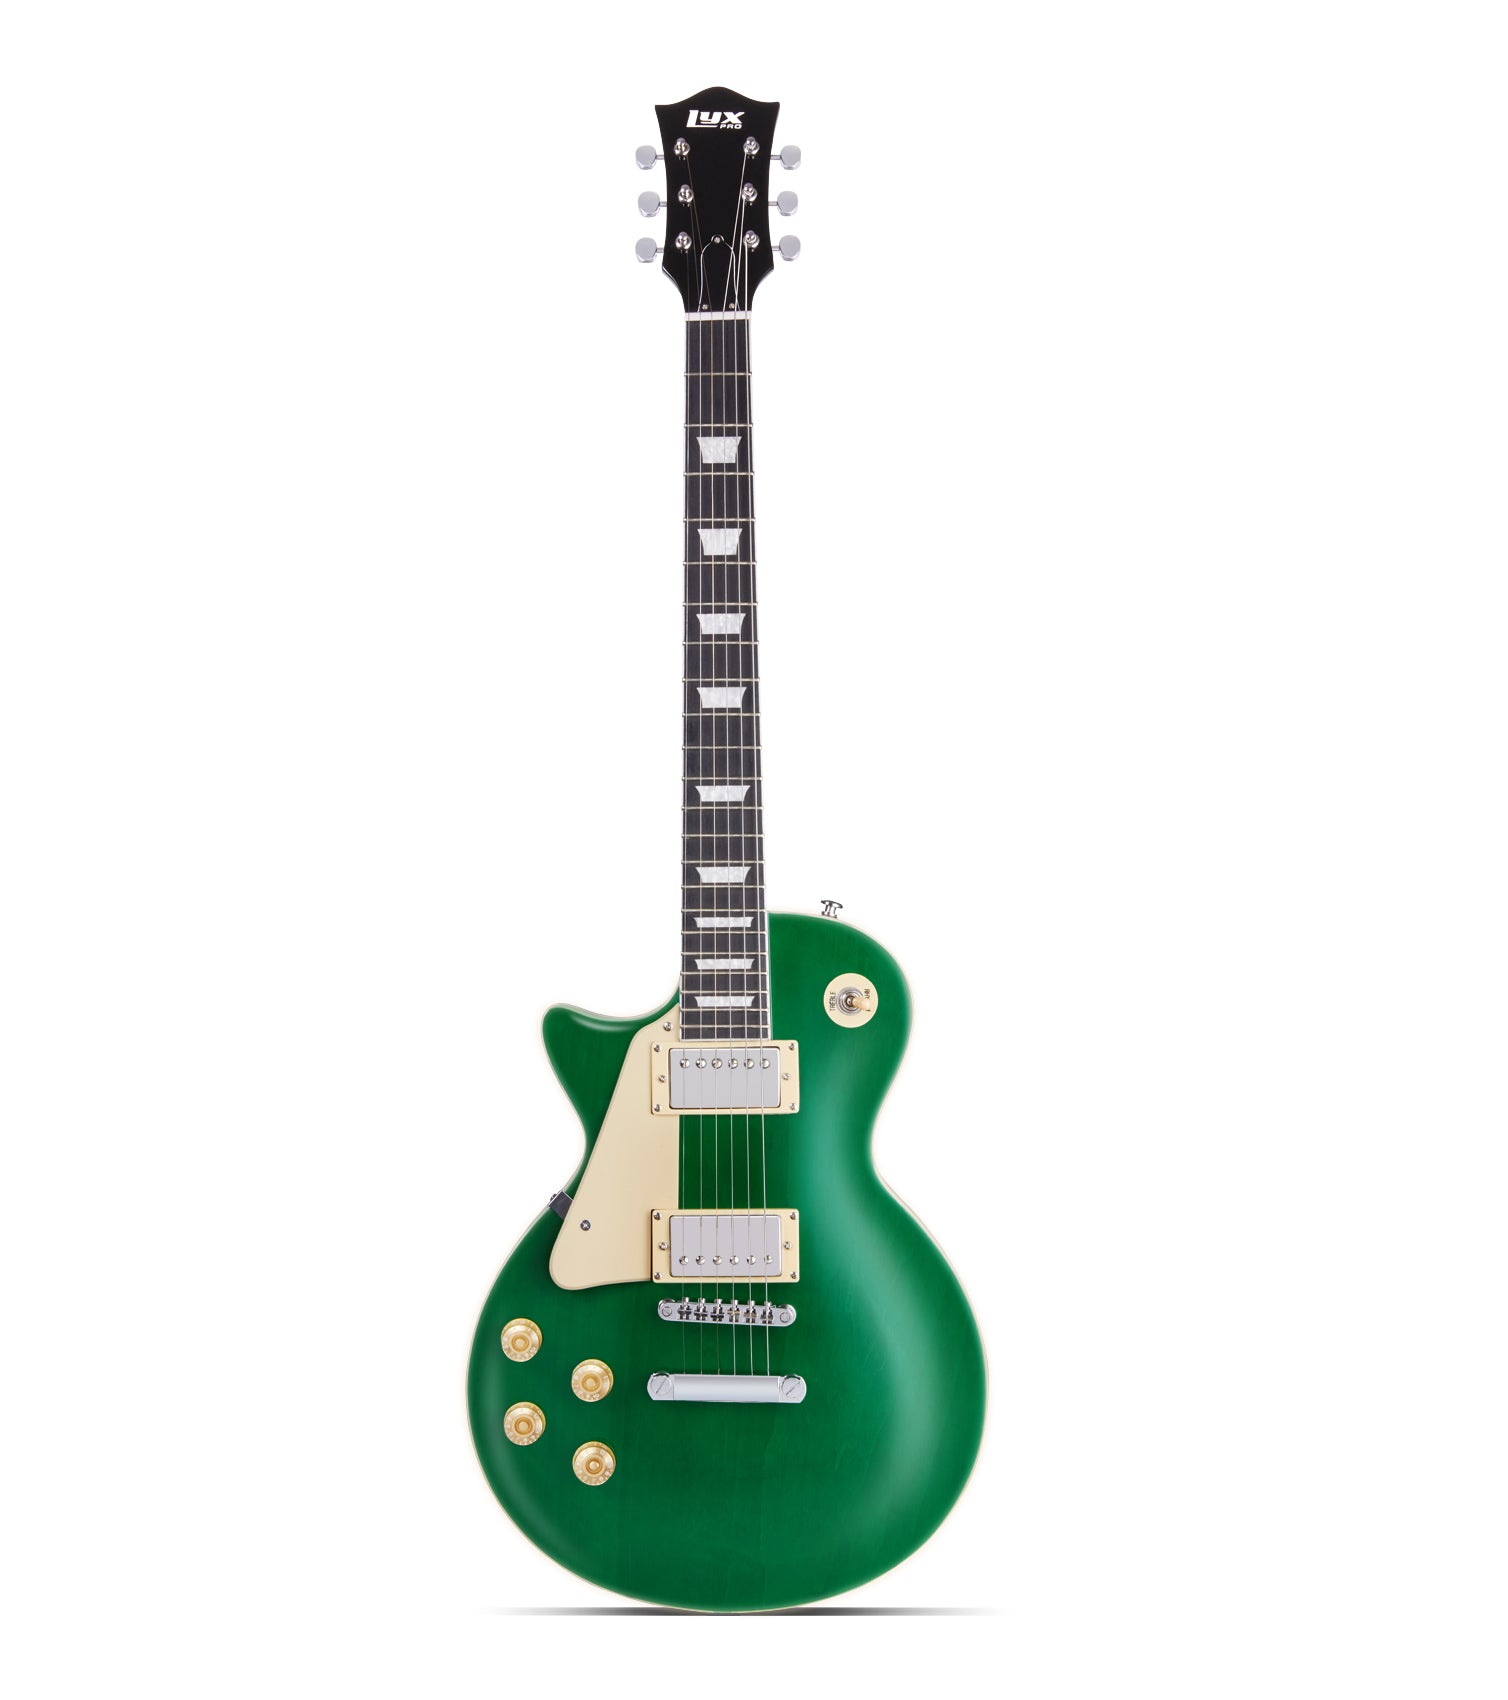 39 inch Left Handed Les Paul Electric Guitar Green - Hero Image